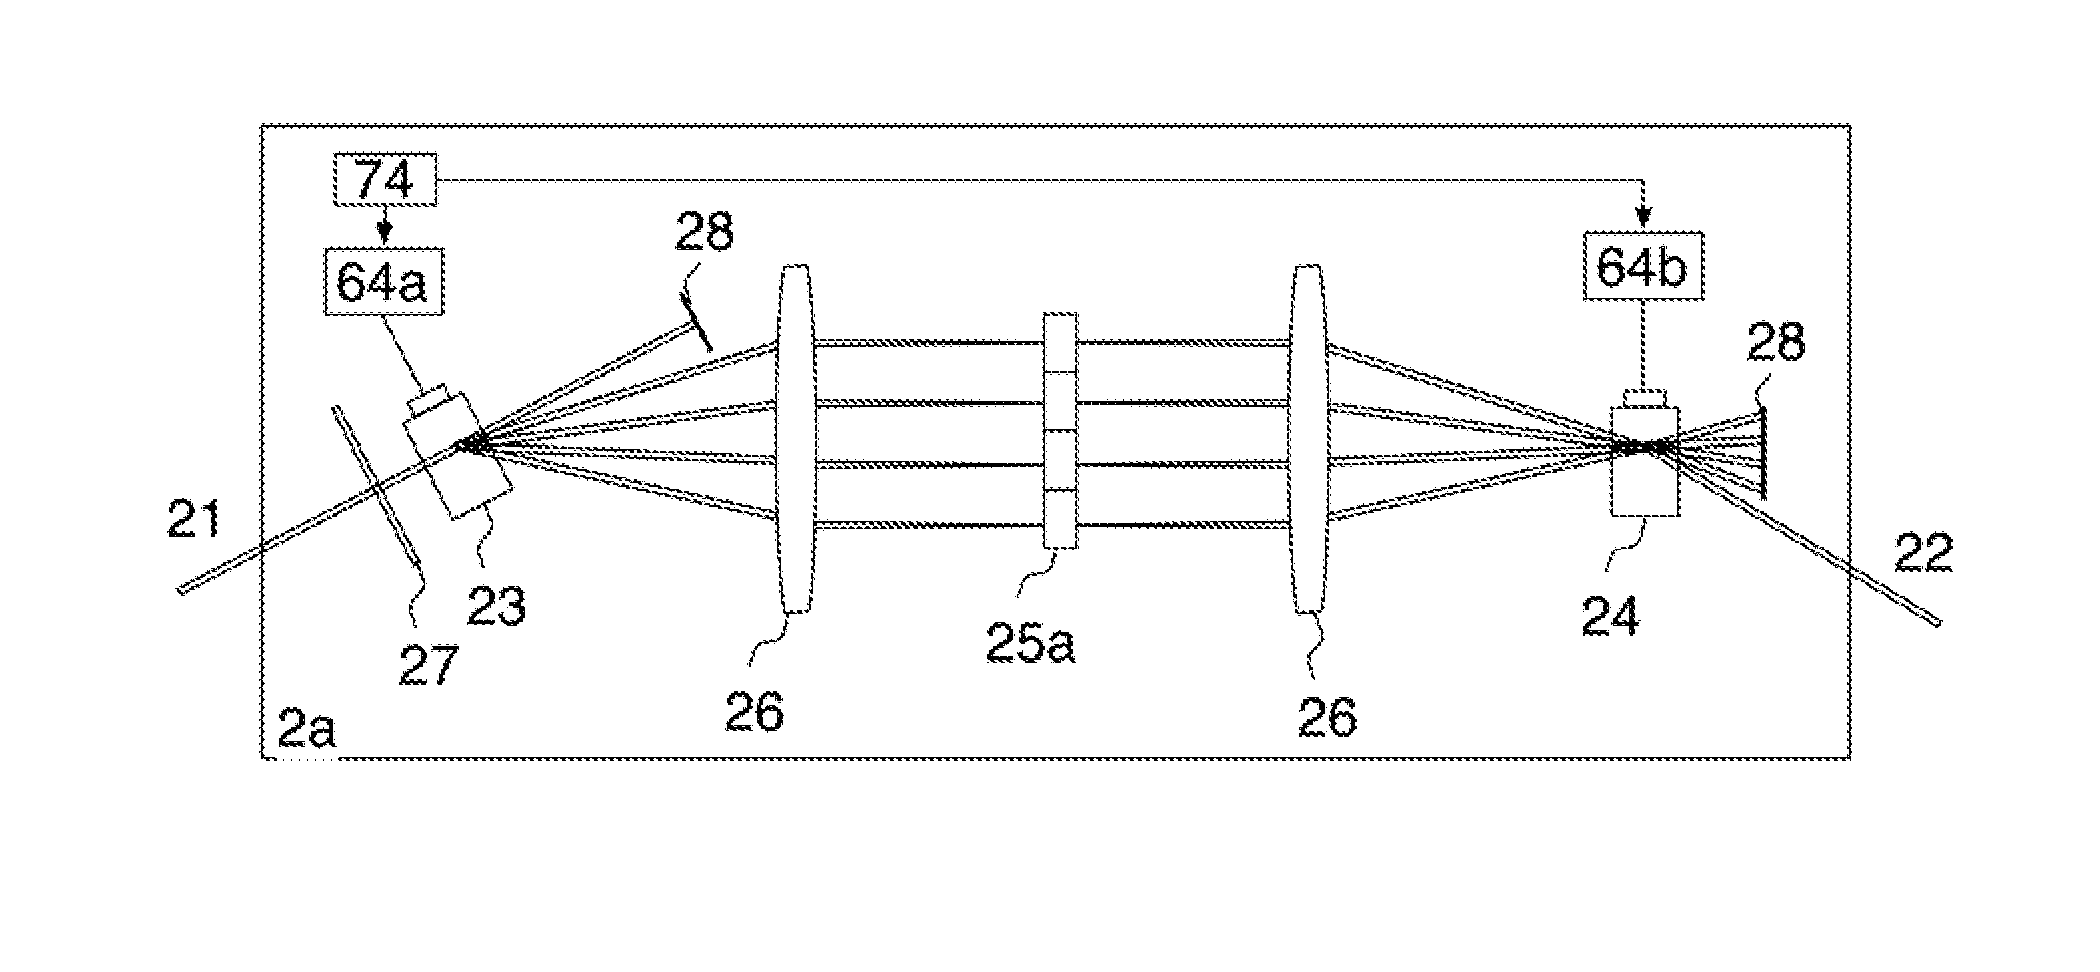 Multiple paths measuring and imaging apparatus and method